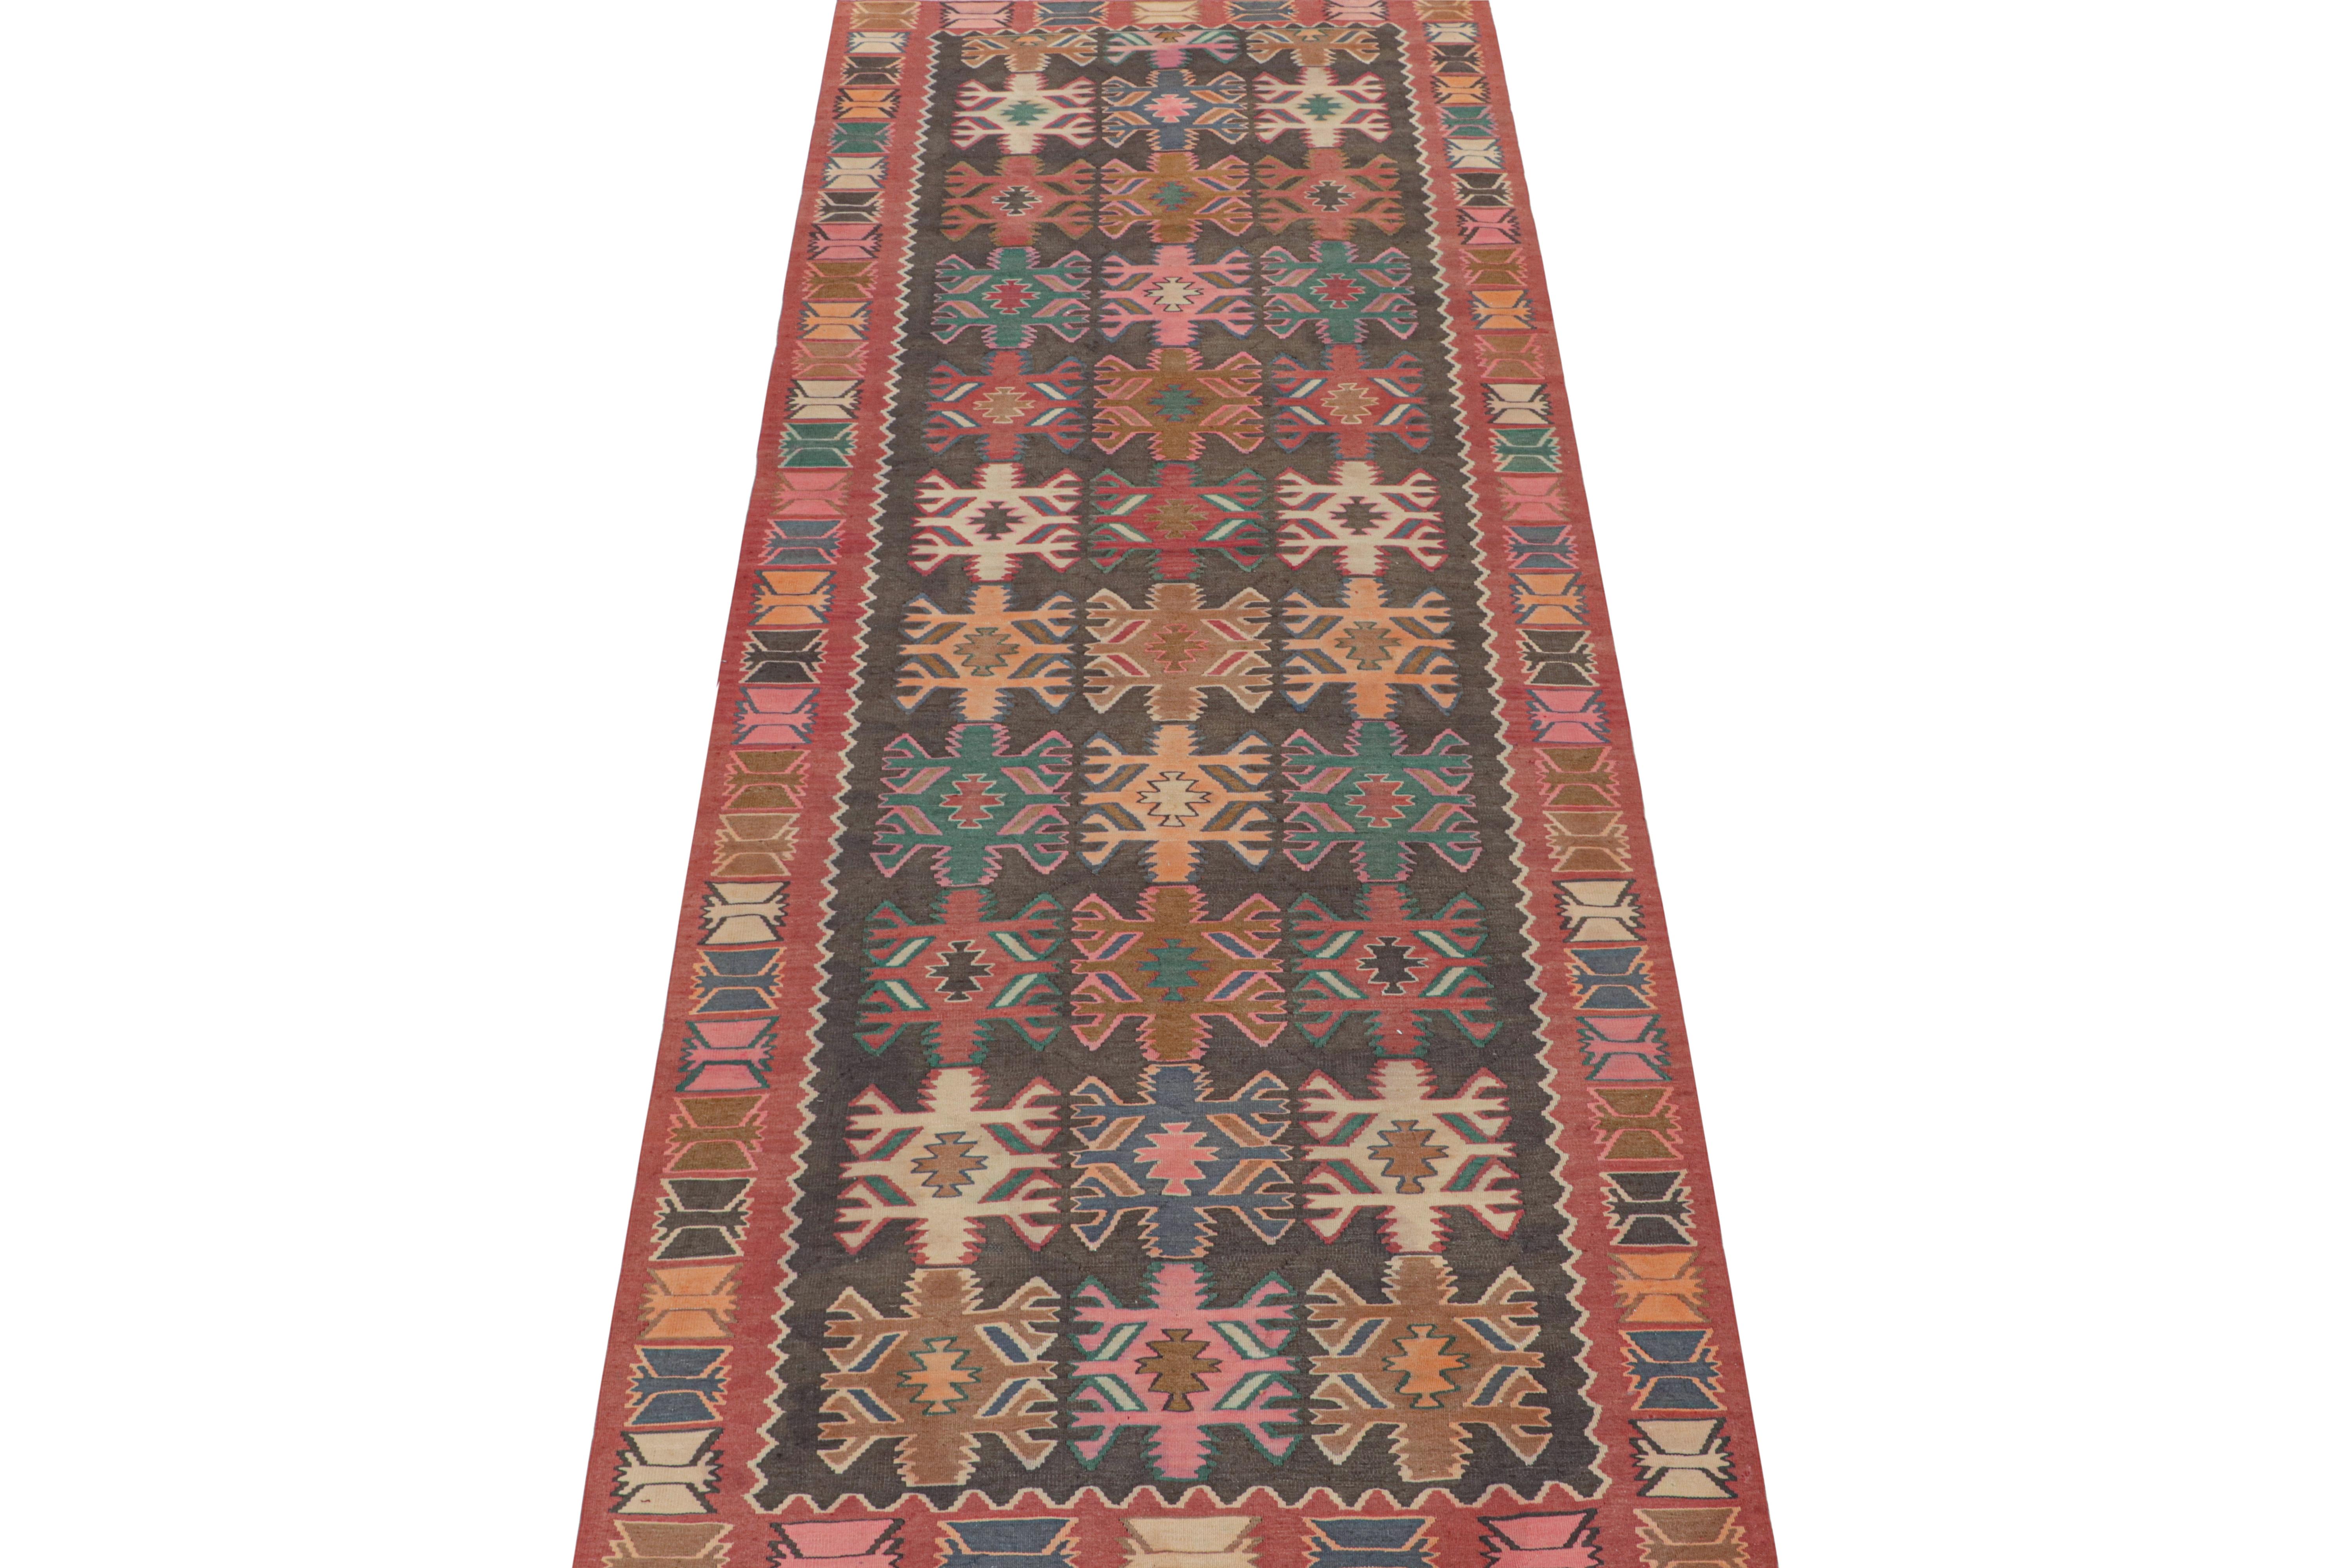 This vintage 5x13 Persian Kilim is a tribal rug believed to hail from Meshkin—a small Iranian village known for its craft.

Handwoven in wool circa 1950-1960, these are sometimes called Northwest designs—a well-known Persian provenance. Its design